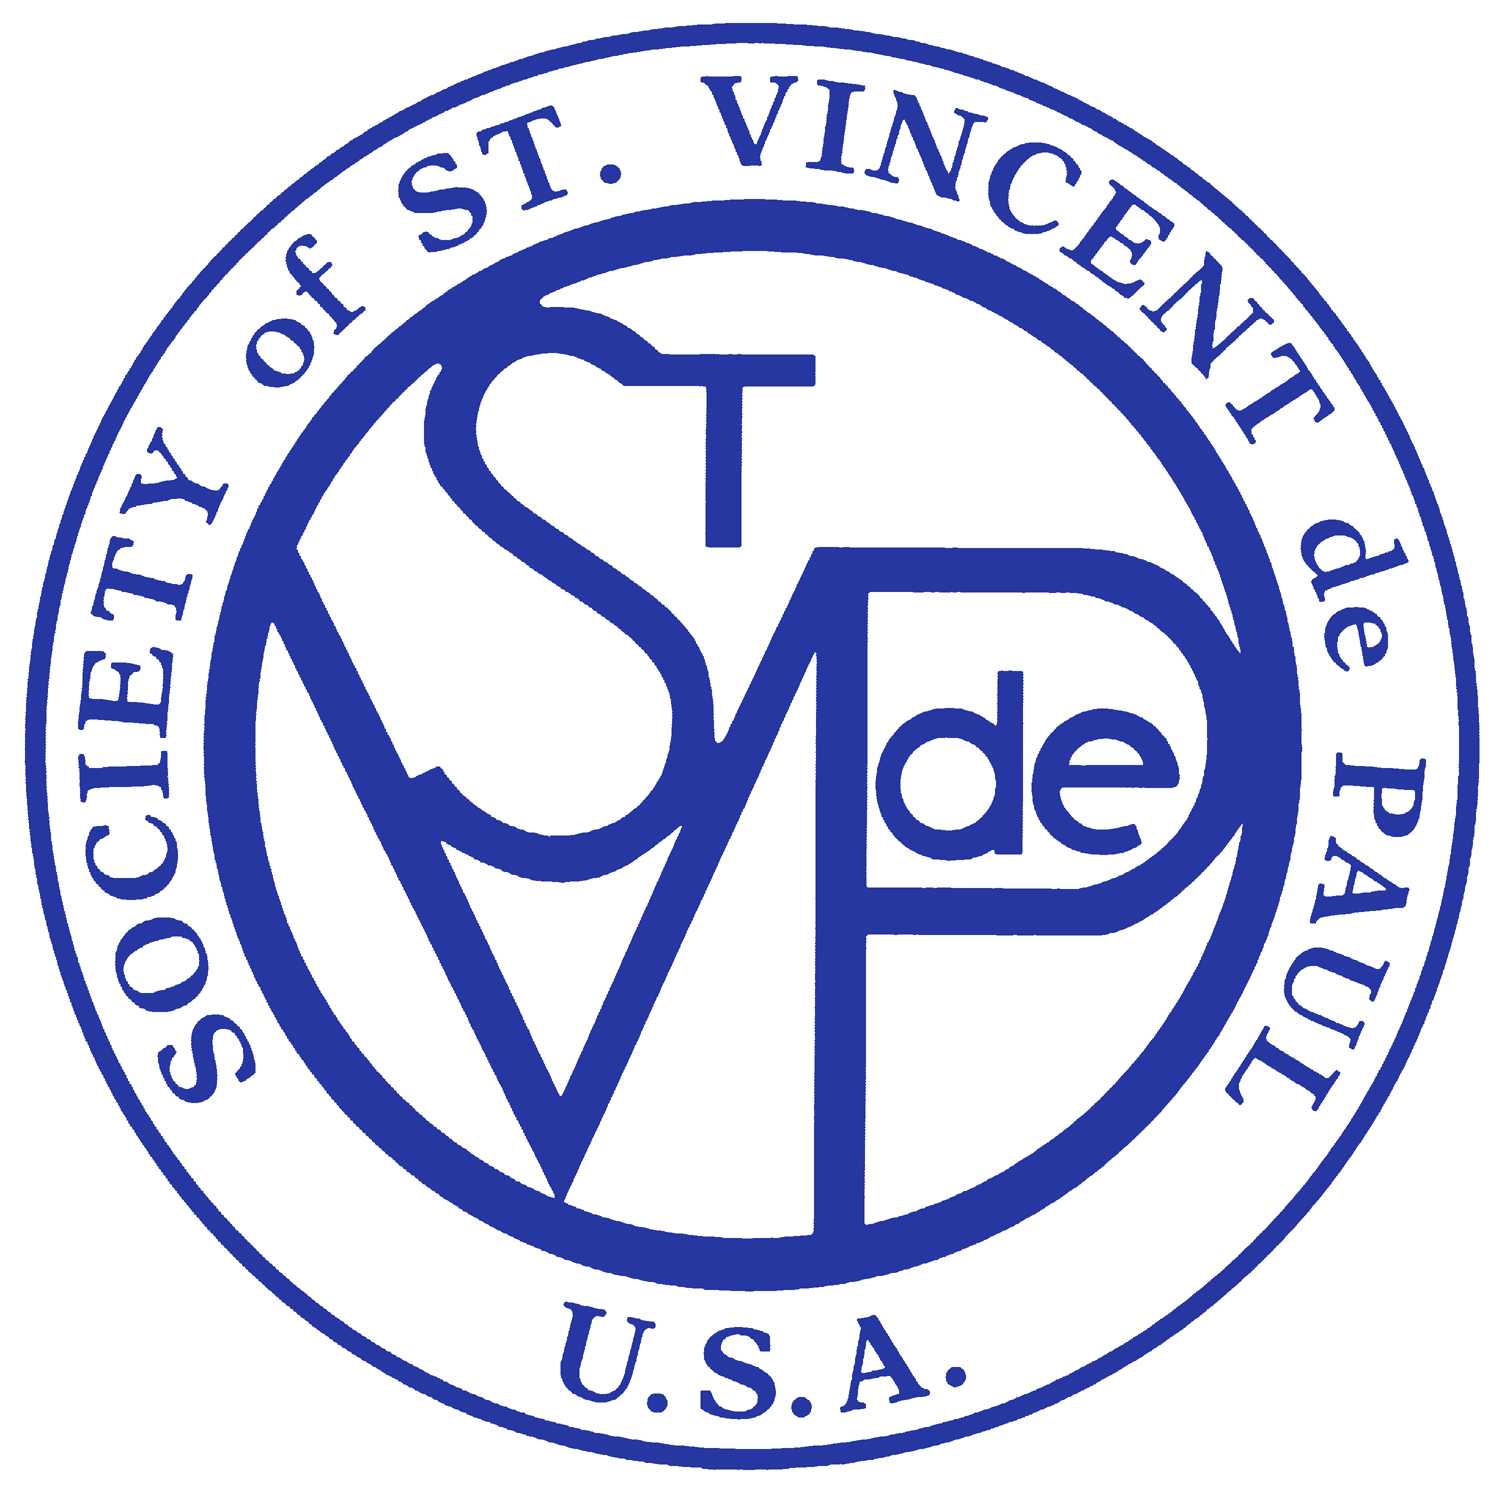 Catholic Churches in Joliet, IL: The Society of St. Vincent DePaul.